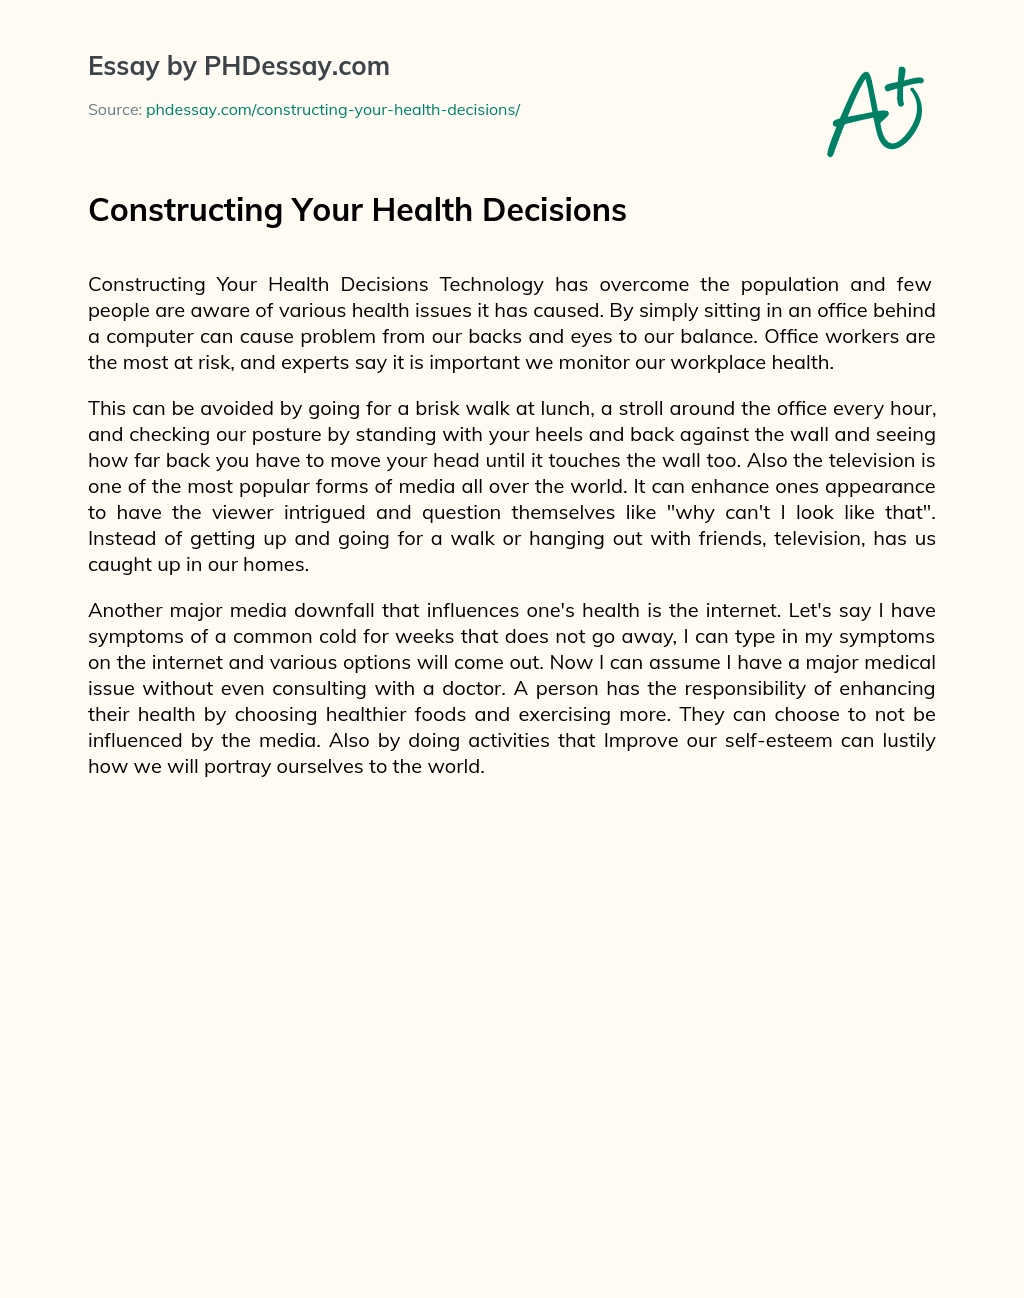 Constructing Your Health Decisions essay